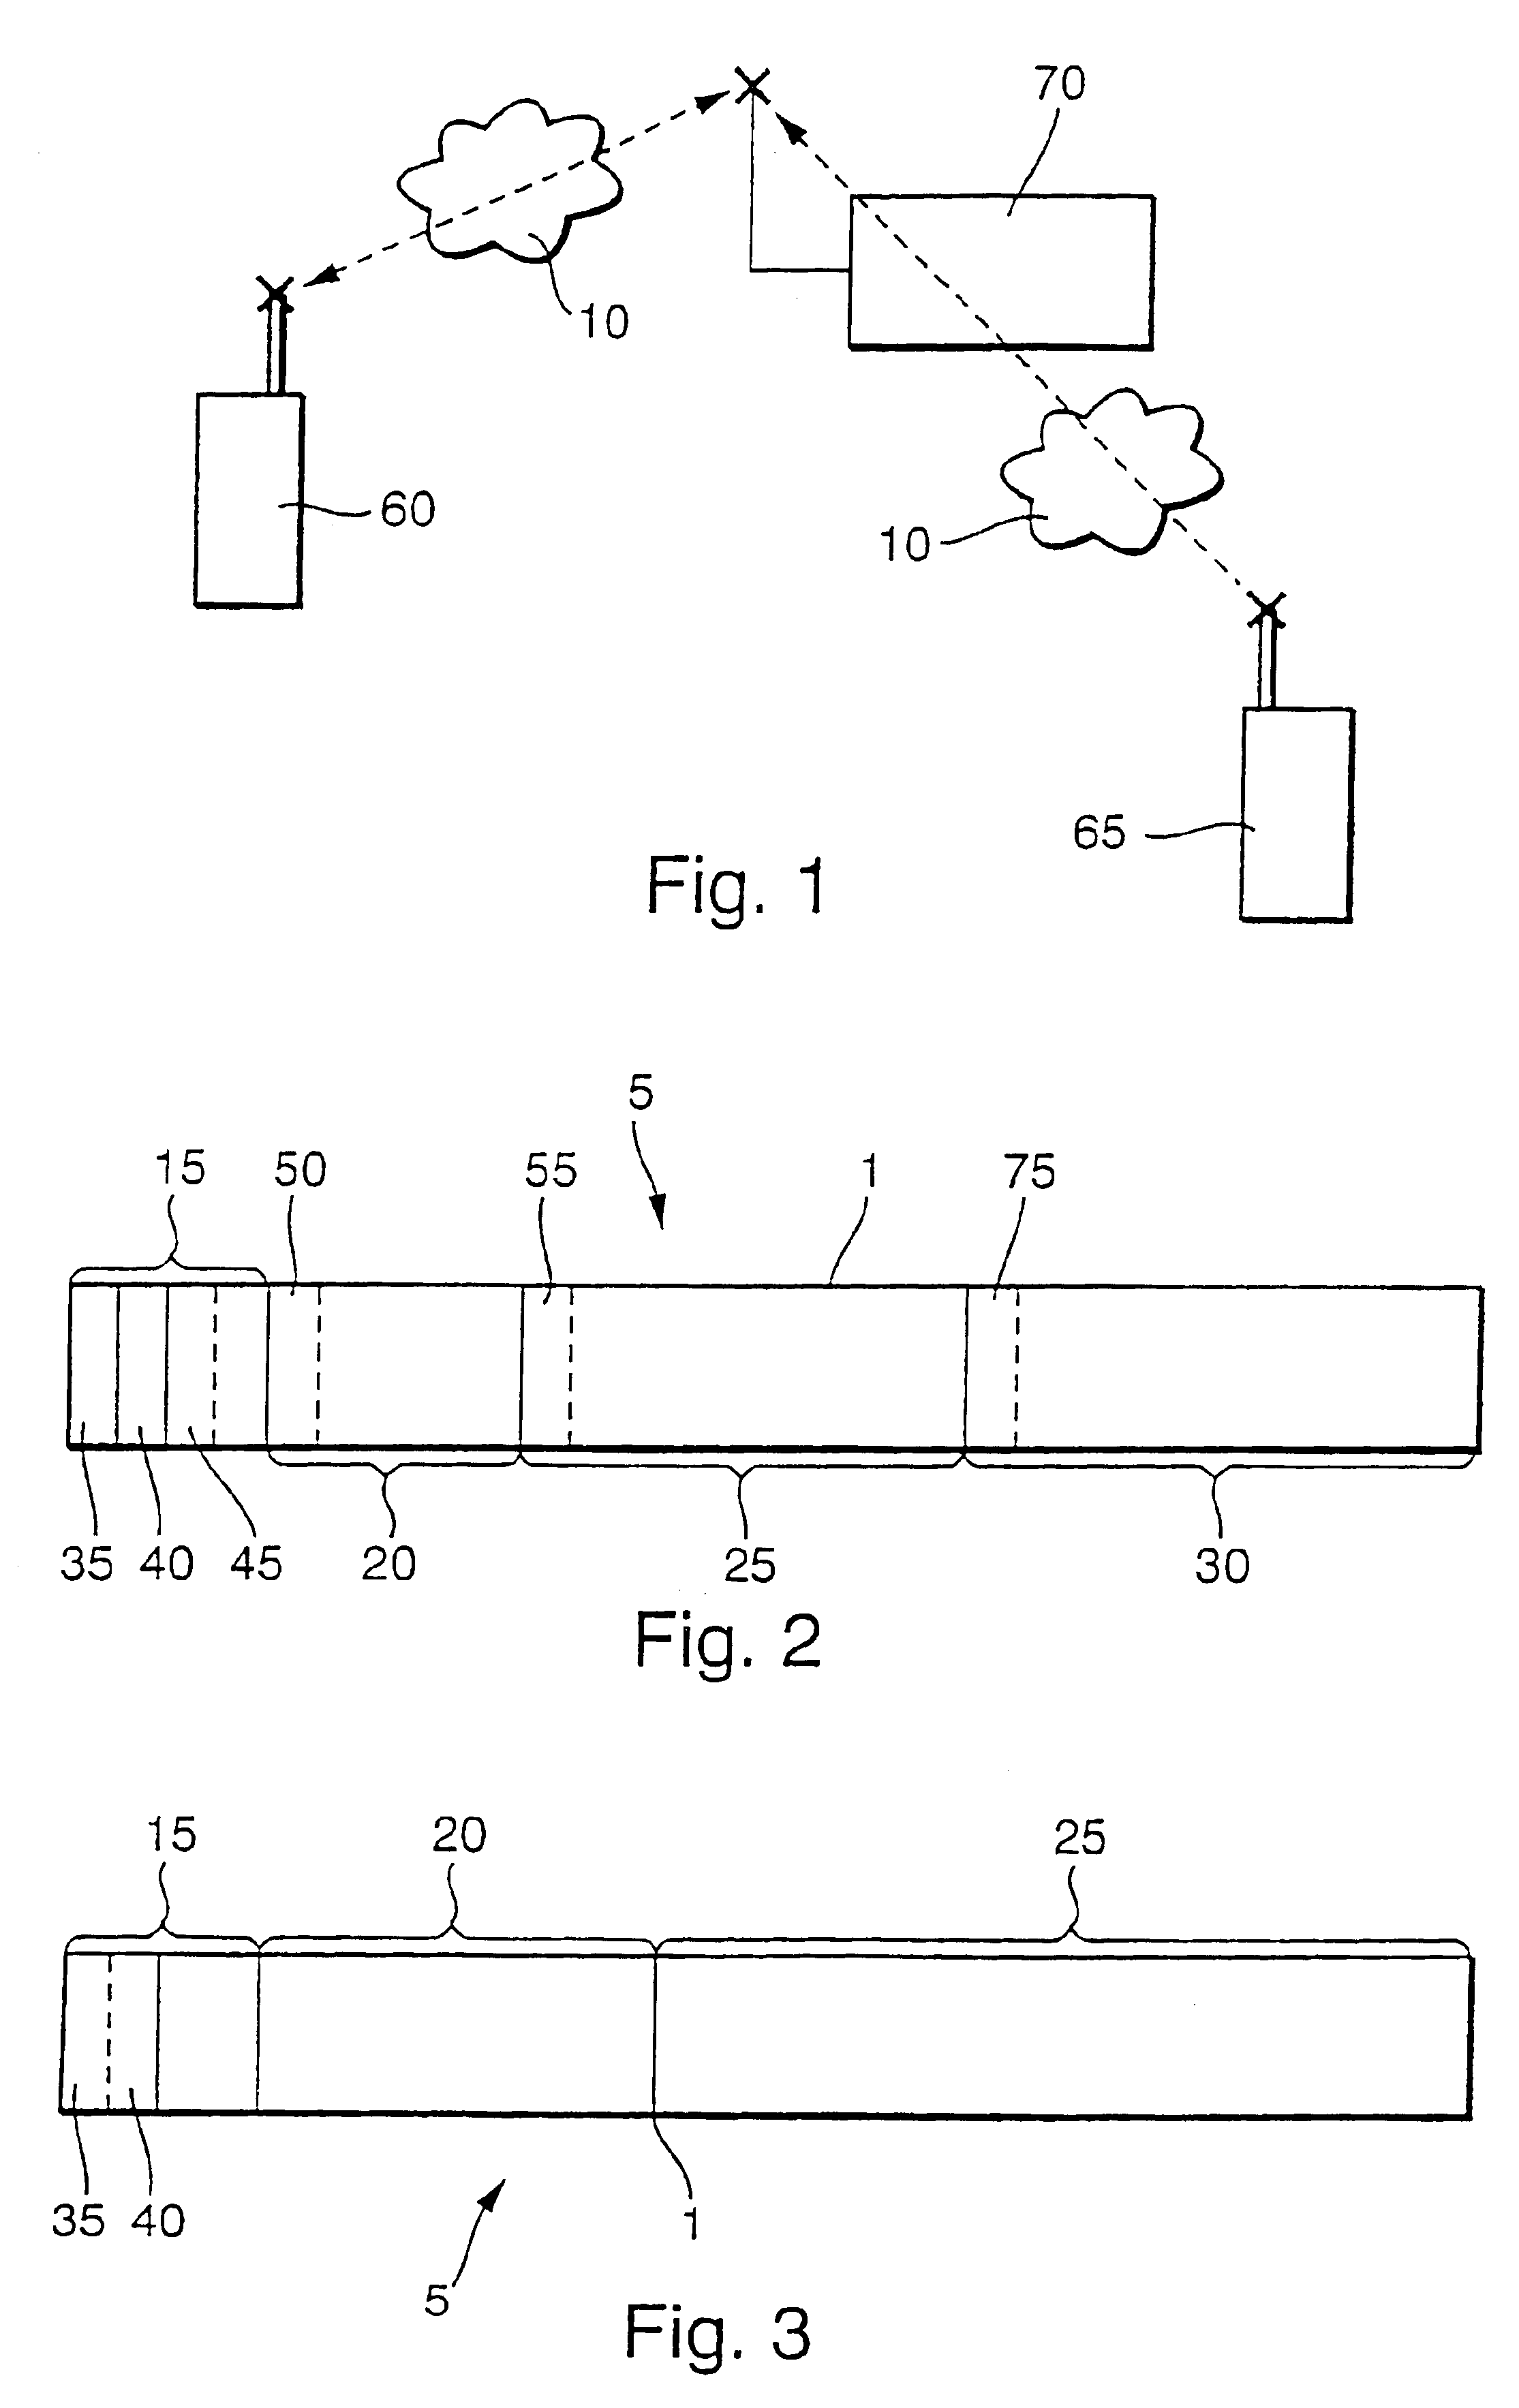 Transmission frame and radio unit for transmitting short messages with different data format